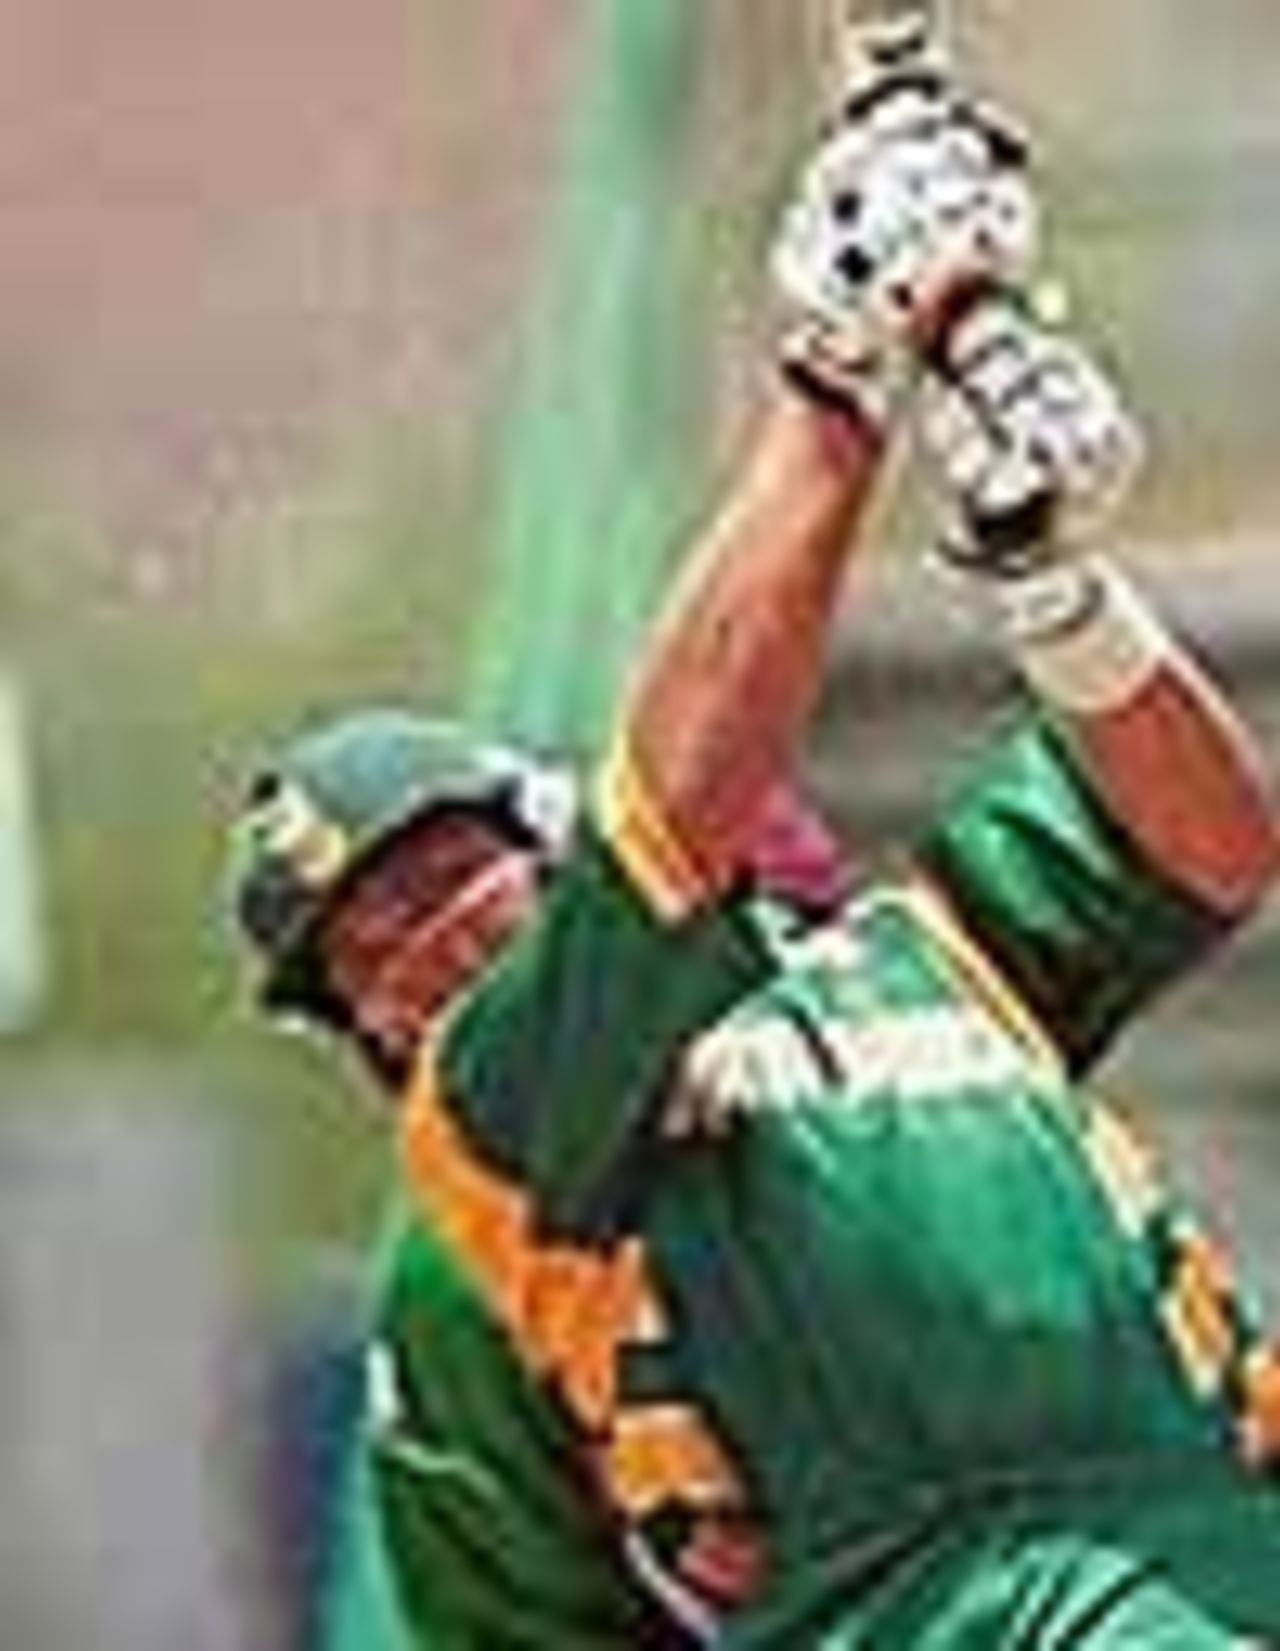 Kallis pictured batting in the 3rd ODI between the West Indies and South Africa at Grenada, 5th May 2001